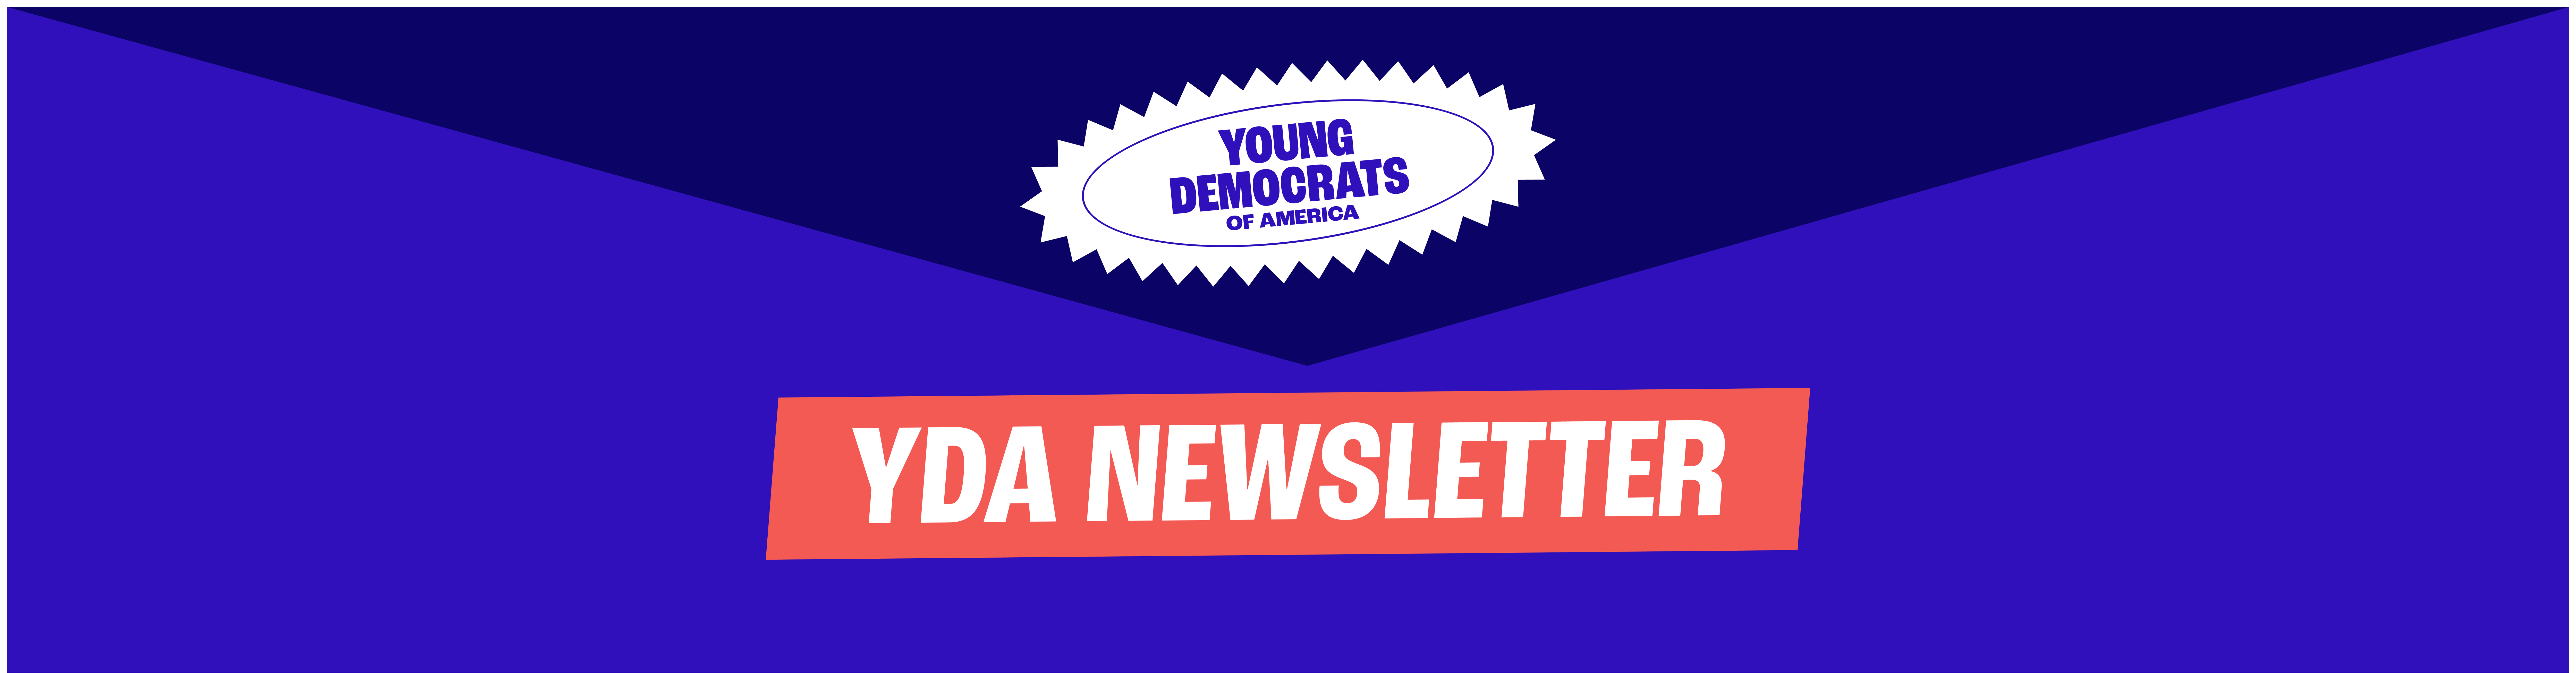 It's your YDA Newsletter!